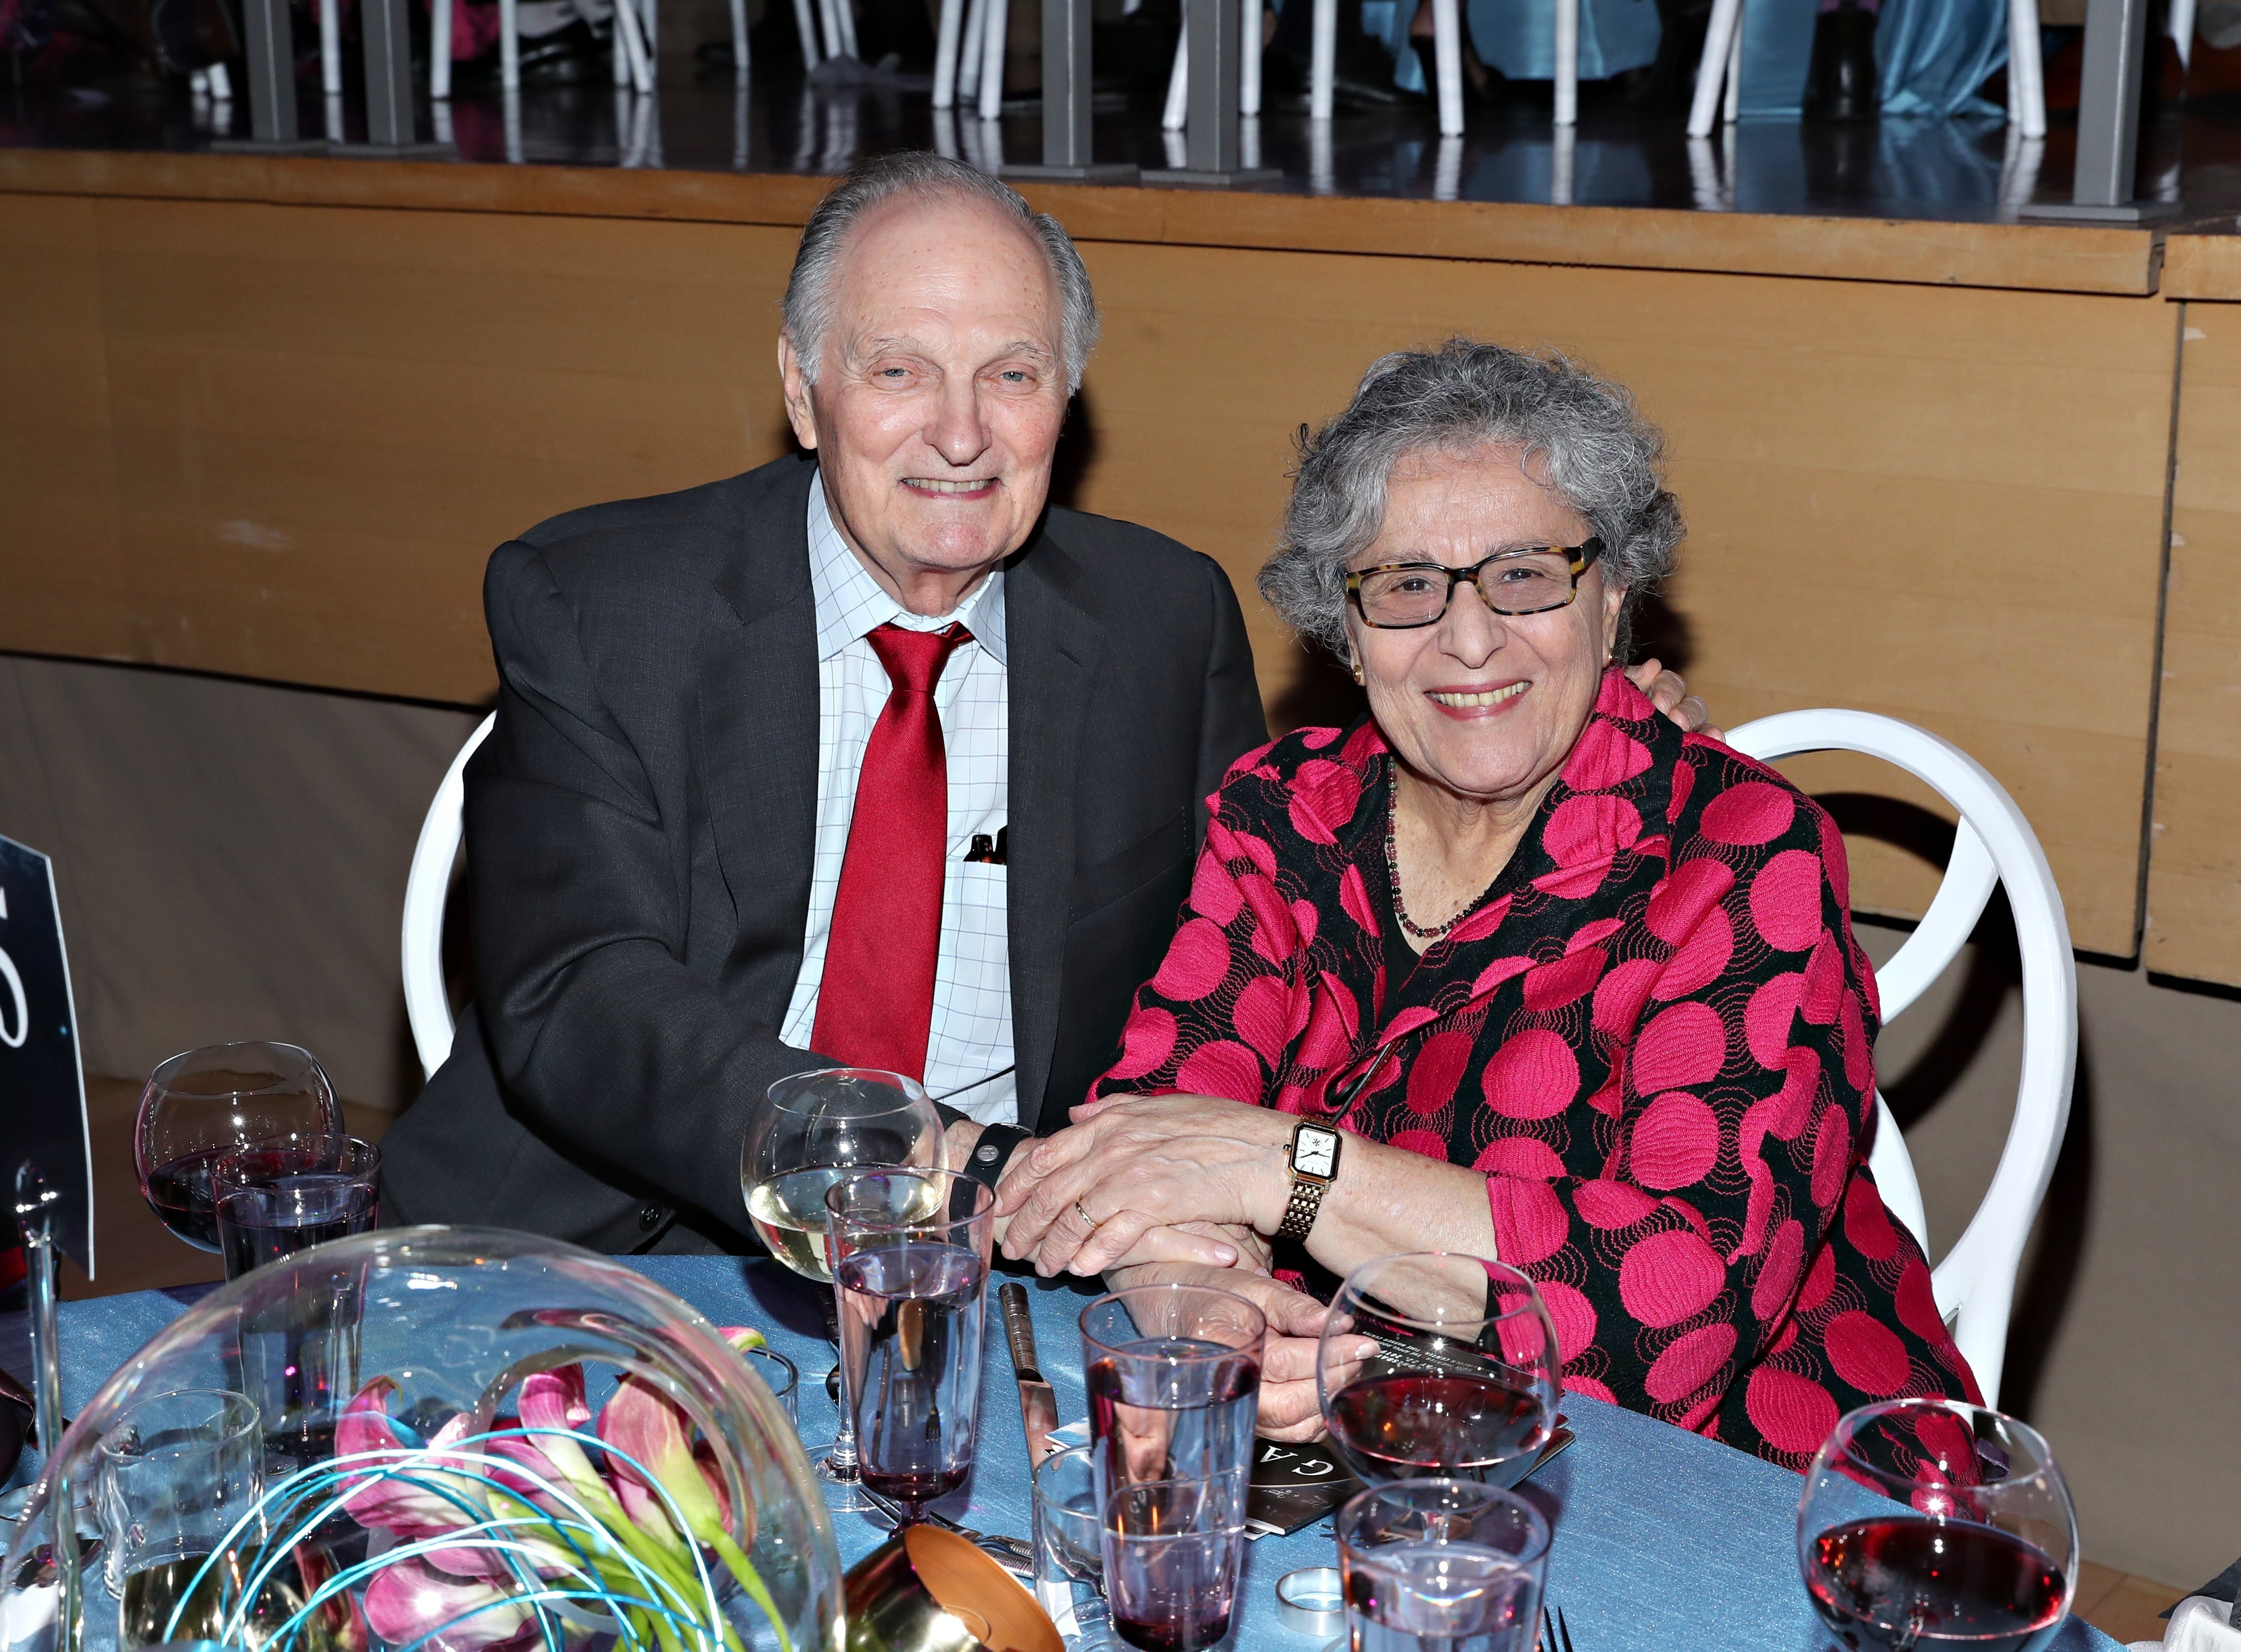  Alan Alda and wife Arlene Alda attend the World Science Festival's 12th Annual Gala at Jazz at Lincoln Center on May 22, 2019 | Photo: GettyImages